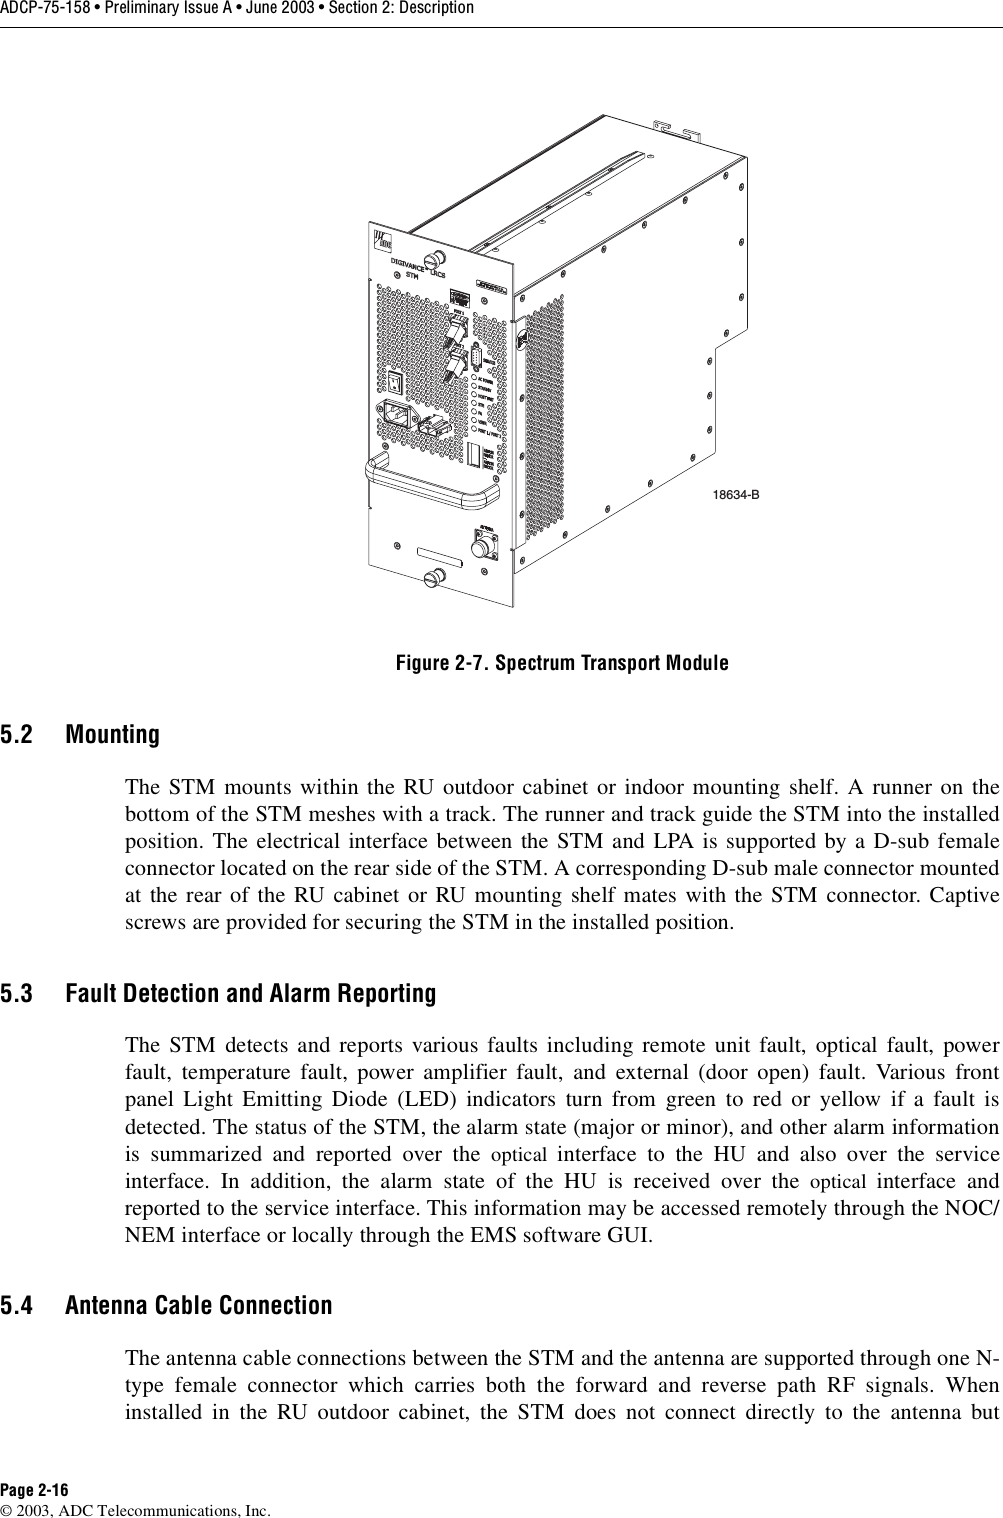 ADCP-75-158 • Preliminary Issue A • June 2003 • Section 2: DescriptionPage 2-16© 2003, ADC Telecommunications, Inc.Figure 2-7. Spectrum Transport Module5.2 MountingThe STM mounts within the RU outdoor cabinet or indoor mounting shelf. A runner on thebottom of the STM meshes with a track. The runner and track guide the STM into the installedposition. The electrical interface between the STM and LPA is supported by a D-sub femaleconnector located on the rear side of the STM. A corresponding D-sub male connector mountedat the rear of the RU cabinet or RU mounting shelf mates with the STM connector. Captivescrews are provided for securing the STM in the installed position. 5.3 Fault Detection and Alarm ReportingThe STM detects and reports various faults including remote unit fault, optical fault, powerfault, temperature fault, power amplifier fault, and external (door open) fault. Various frontpanel Light Emitting Diode (LED) indicators turn from green to red or yellow if a fault isdetected. The status of the STM, the alarm state (major or minor), and other alarm informationis summarized and reported over the optical  interface to the HU and also over the serviceinterface. In addition, the alarm state of the HU is received over the optical  interface andreported to the service interface. This information may be accessed remotely through the NOC/NEM interface or locally through the EMS software GUI. 5.4 Antenna Cable ConnectionThe antenna cable connections between the STM and the antenna are supported through one N-type female connector which carries both the forward and reverse path RF signals. Wheninstalled in the RU outdoor cabinet, the STM does not connect directly to the antenna but18634-B